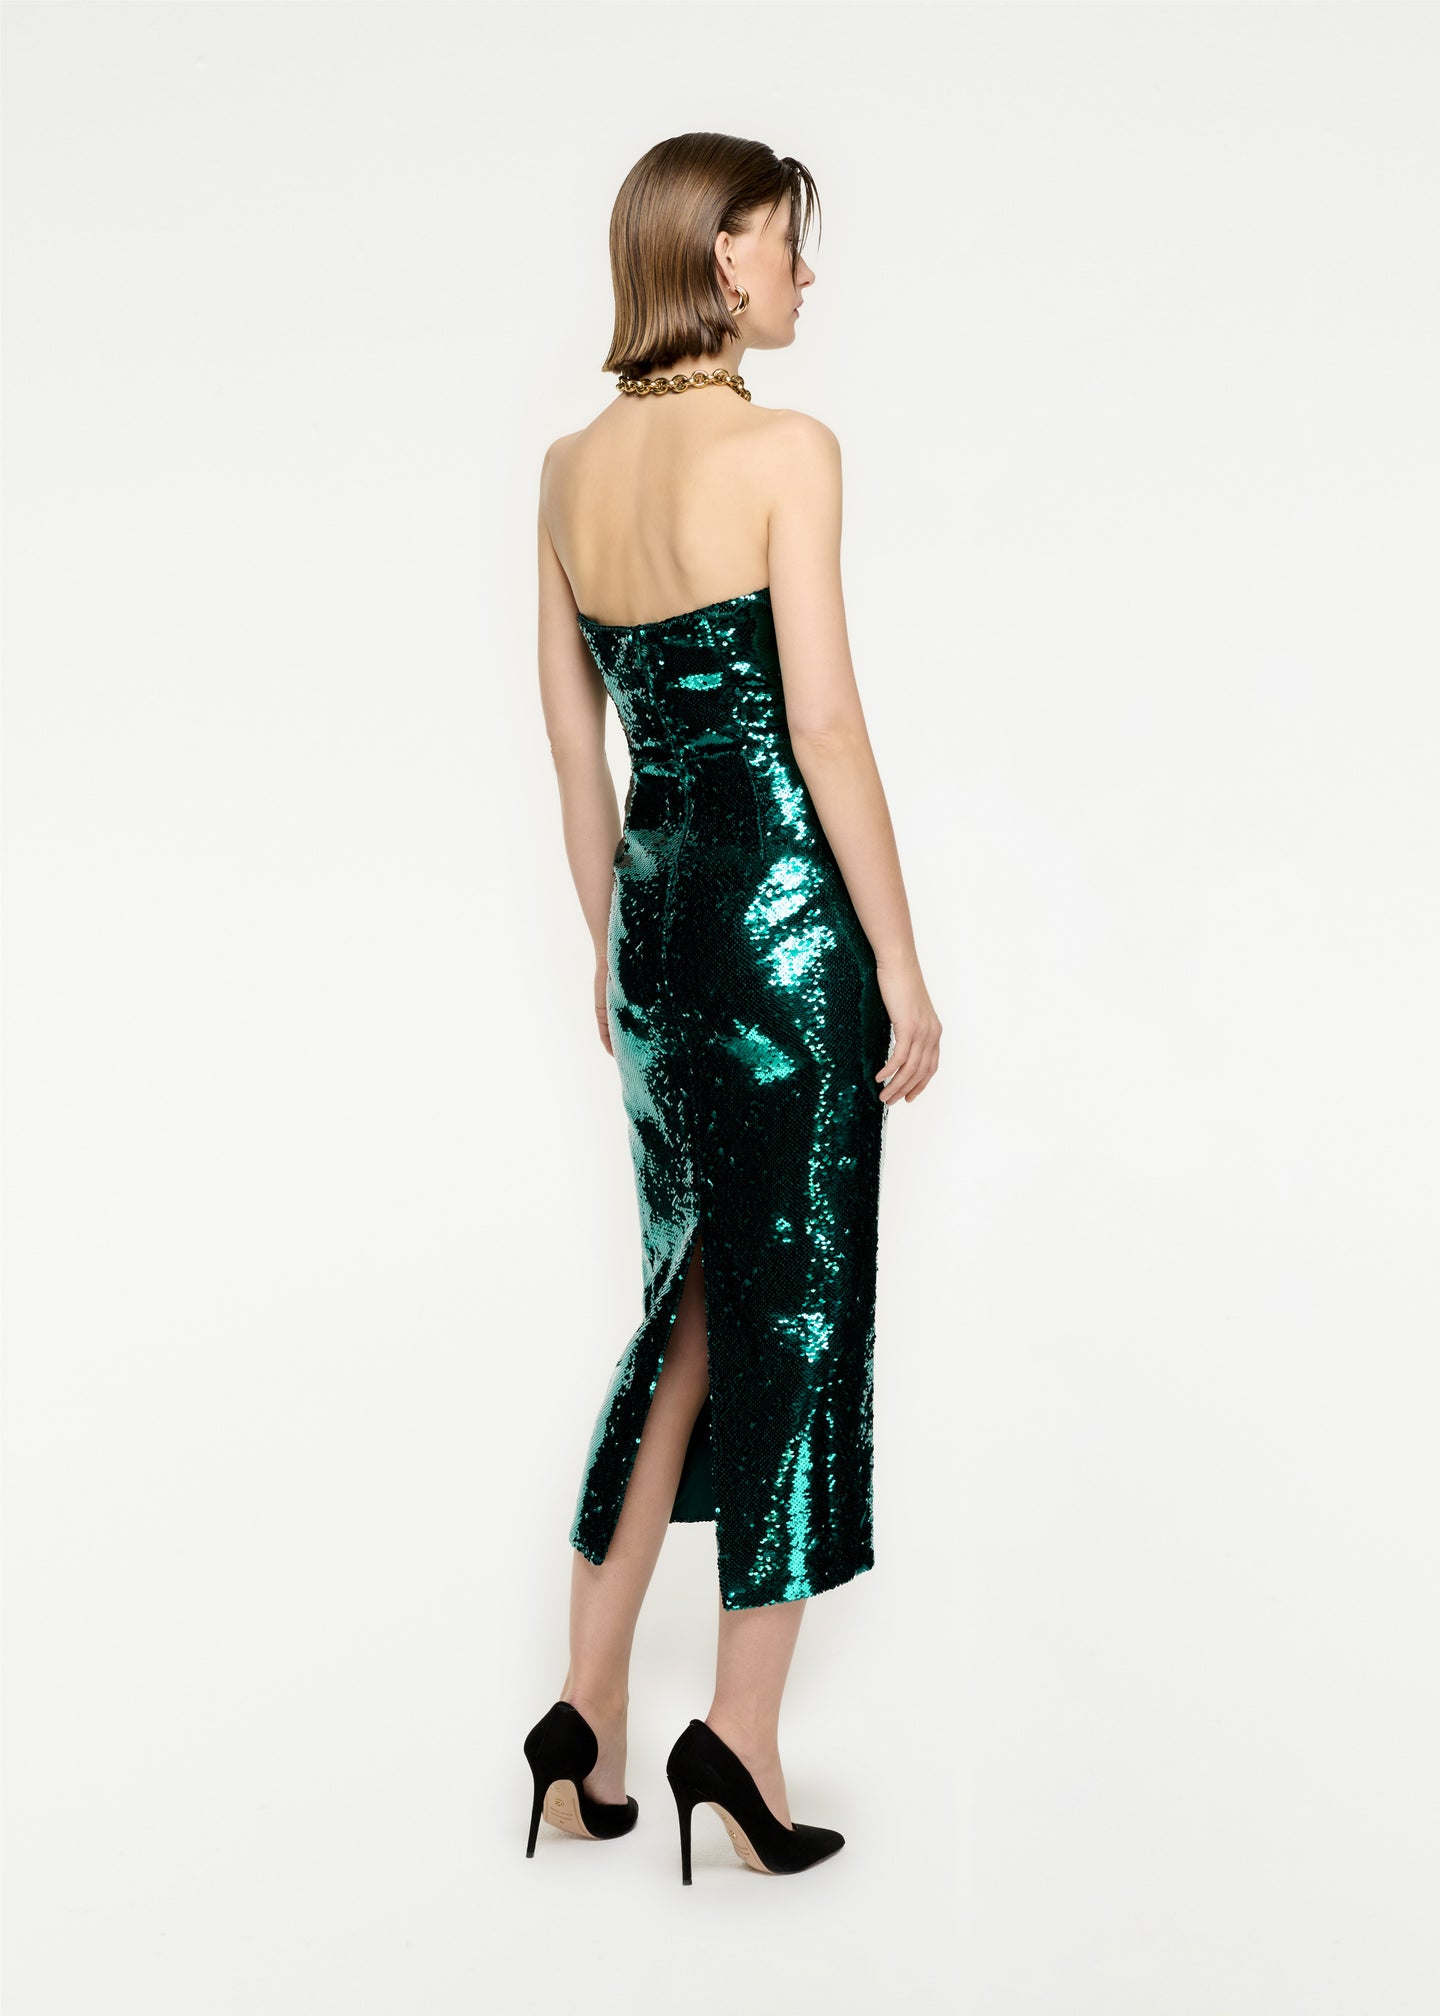 The back of a woman wearing the Strapless Sequin Midi Dress in Green